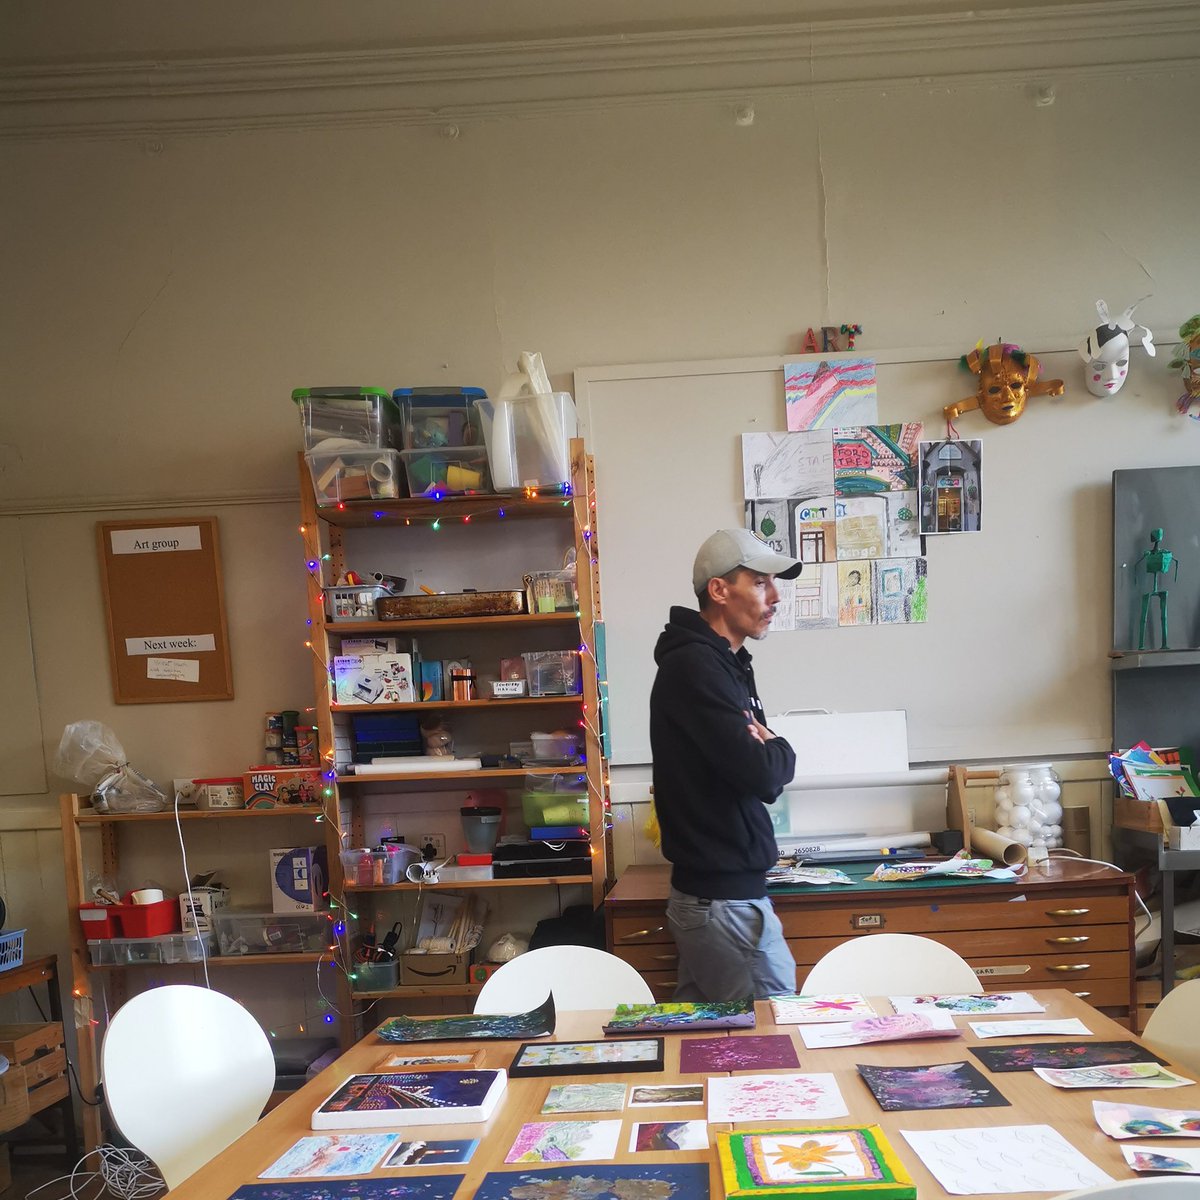 Discover the creativity and resilience showcased at a recent Open Day at our Stafford Centre in Edinburgh 🎨 Every piece of artwork exhibited was crafted by people affected by mental illness. Learn more about the support we deliver in Edinburgh 👇 buff.ly/3GcOH2o